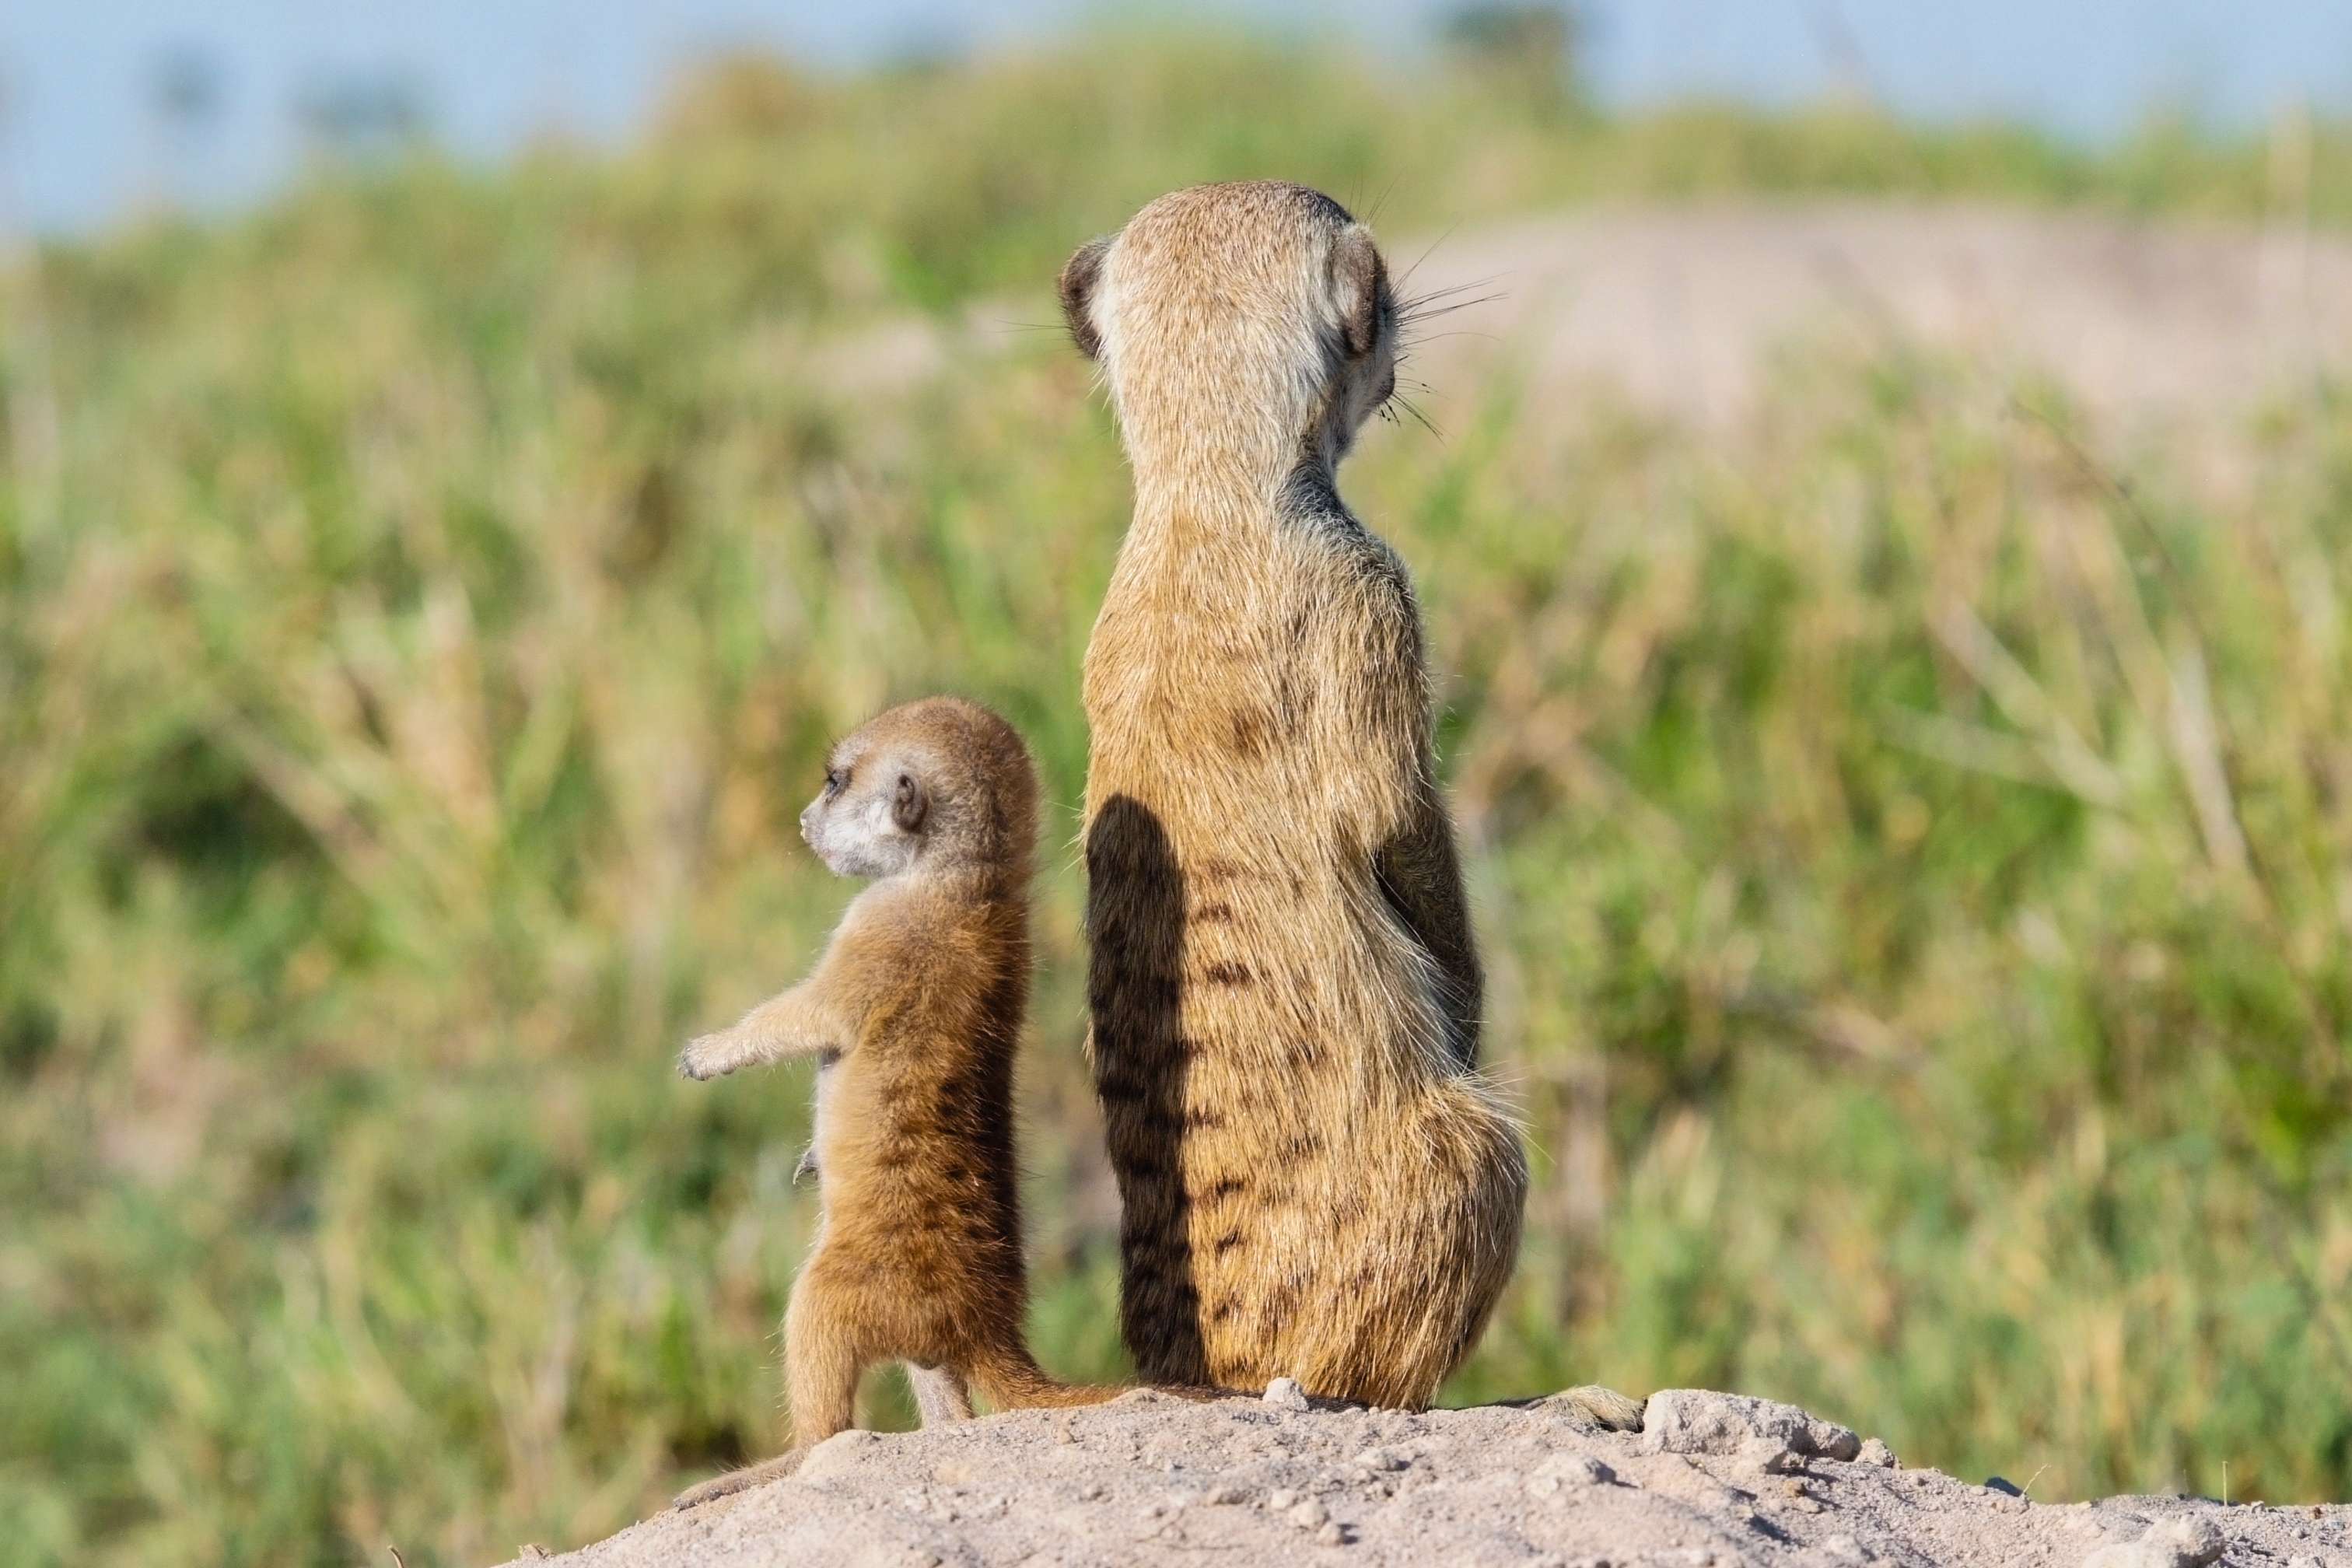 A young meerkat pup learns to stand upright, using its tail for balance. © WWF-US/Rachel Kramer